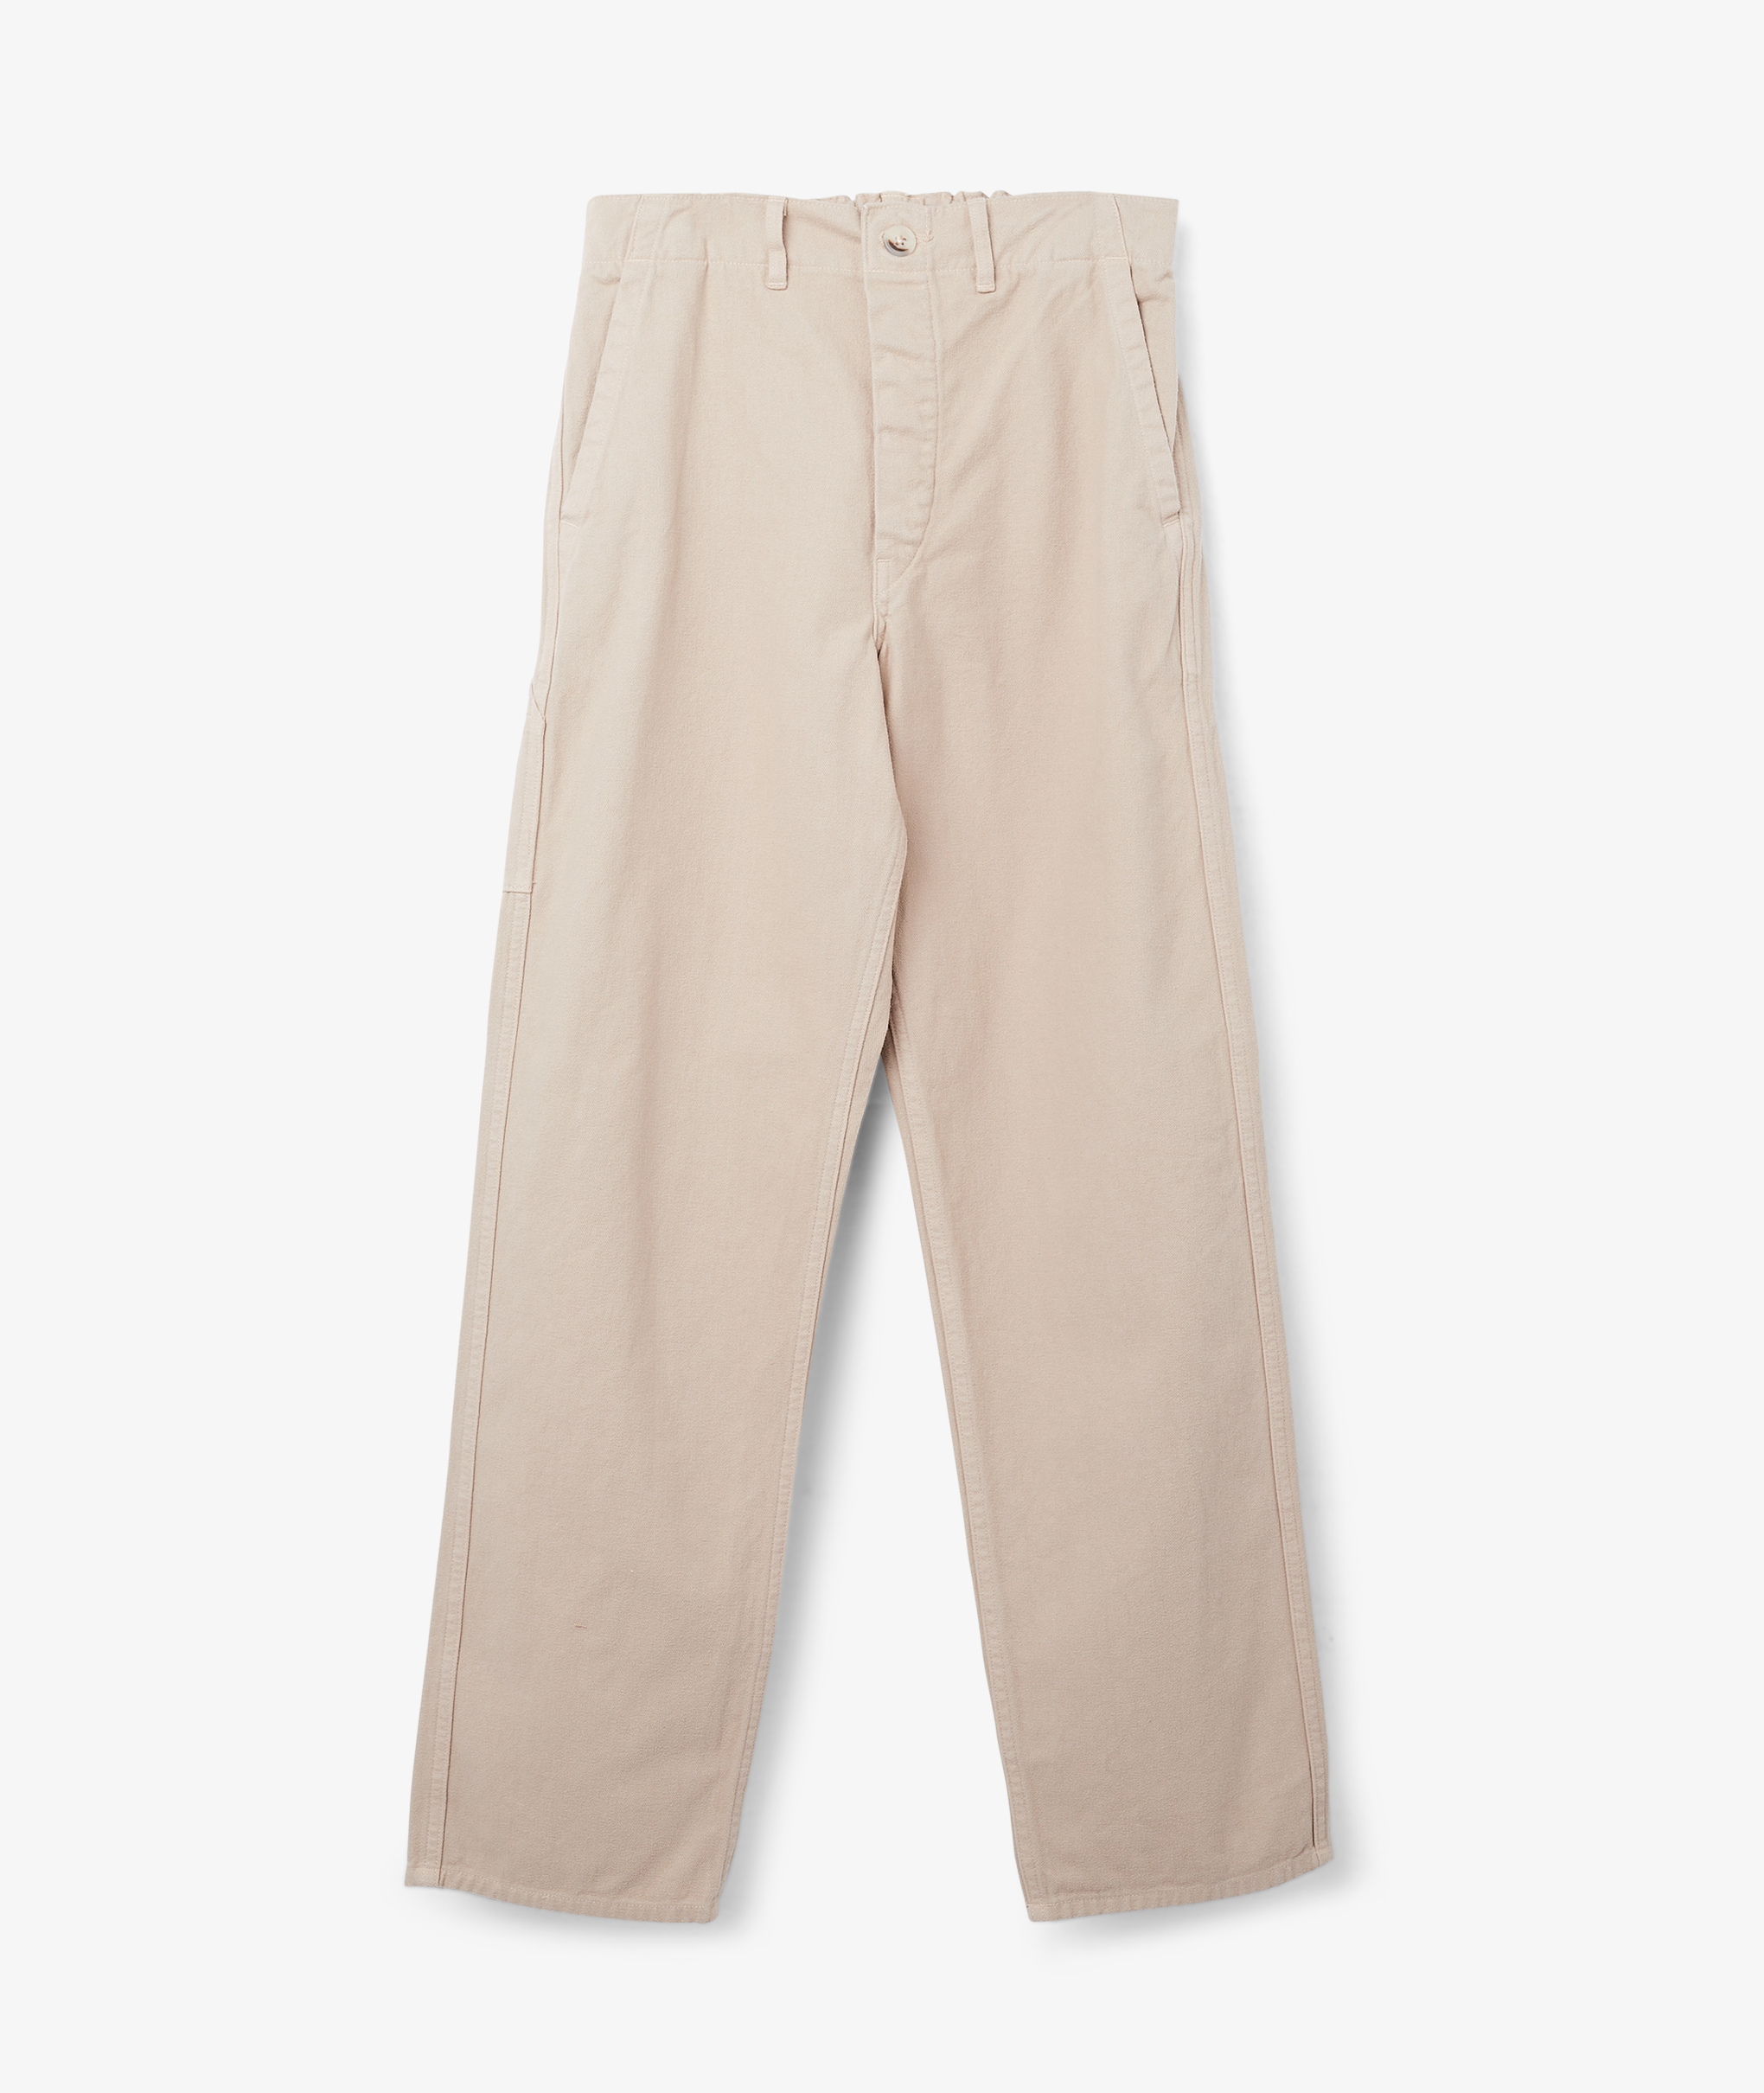 Norse Store | Shipping Worldwide - orSlow French Work Pants - Beige